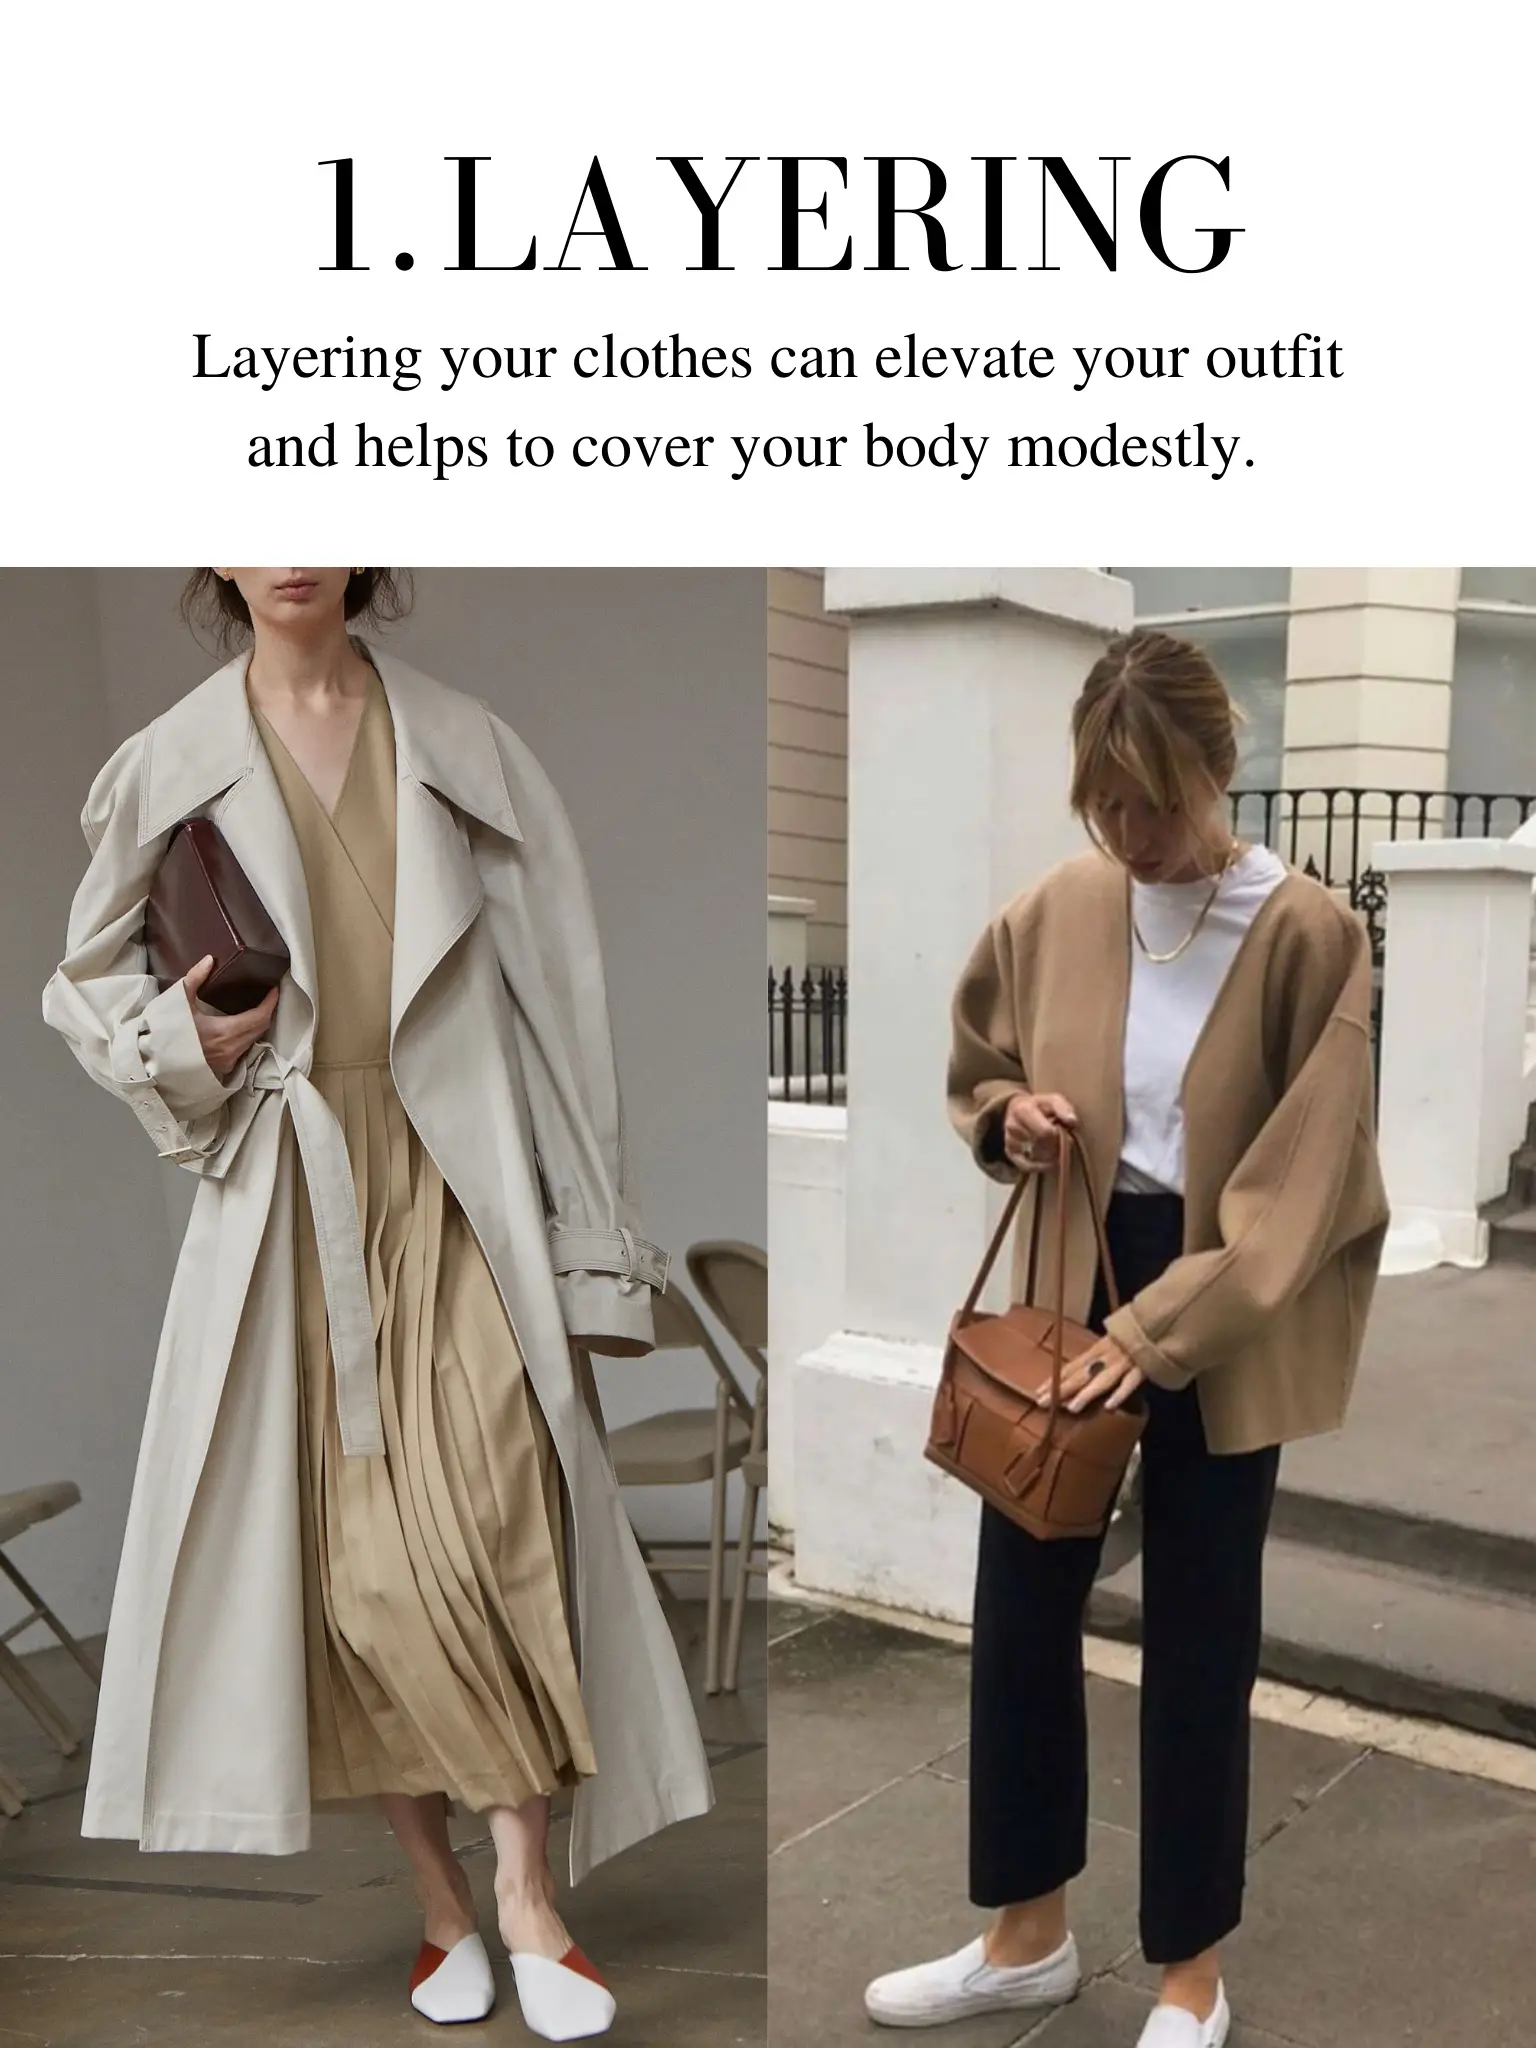 5 Tips To Look Feminine In Modest Look's images(1)